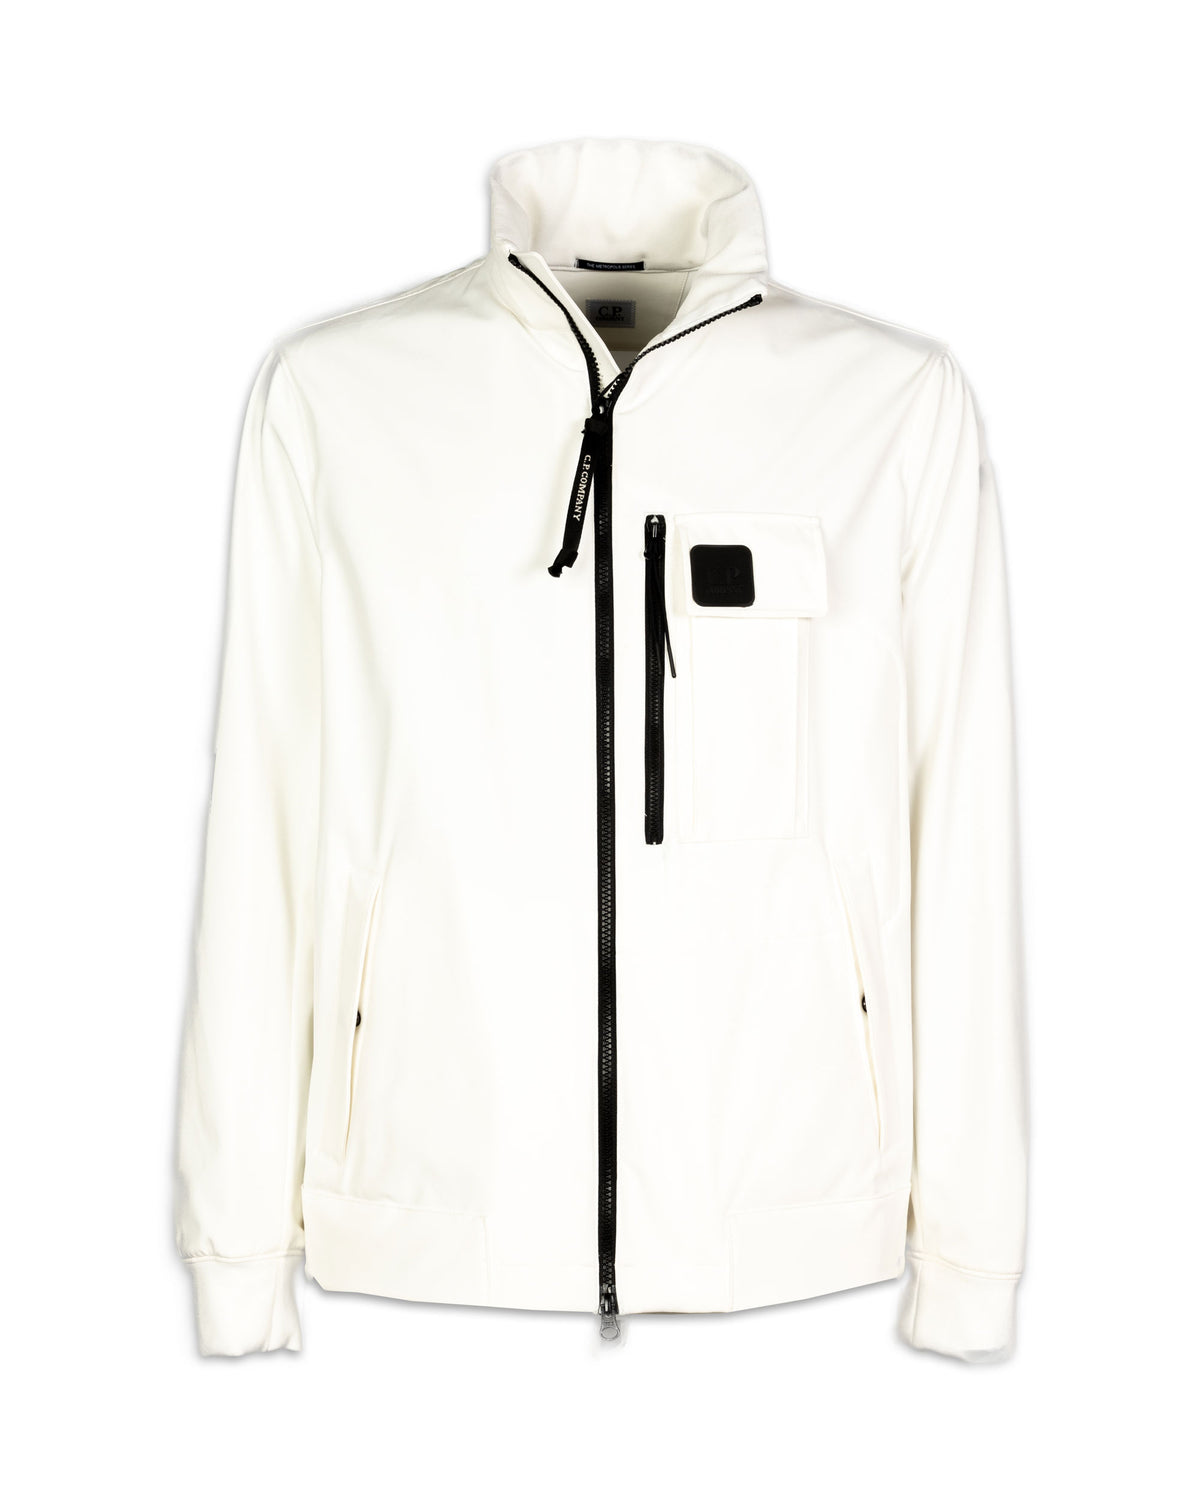 CP Company Metropolis Series Shell-R Stand Collar Jacket White